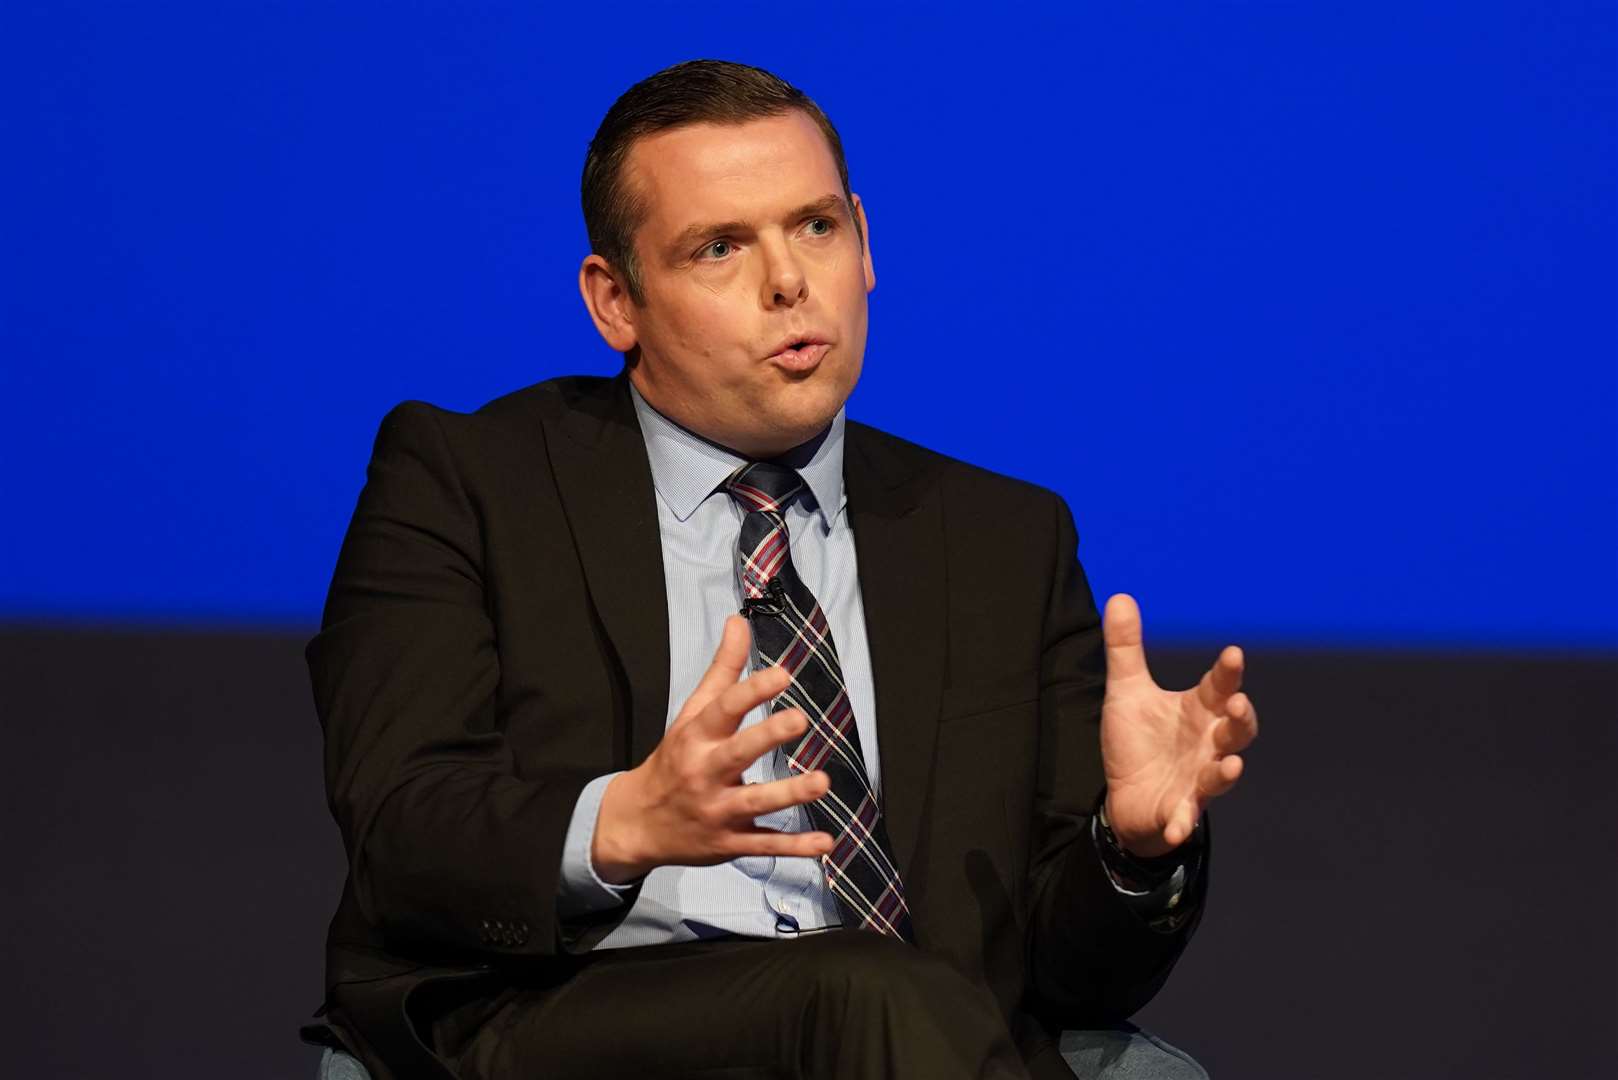 Douglas Ross, Scottish Tory leader, paid tribute to the late Queen in his speech. (Jacob King/PA)